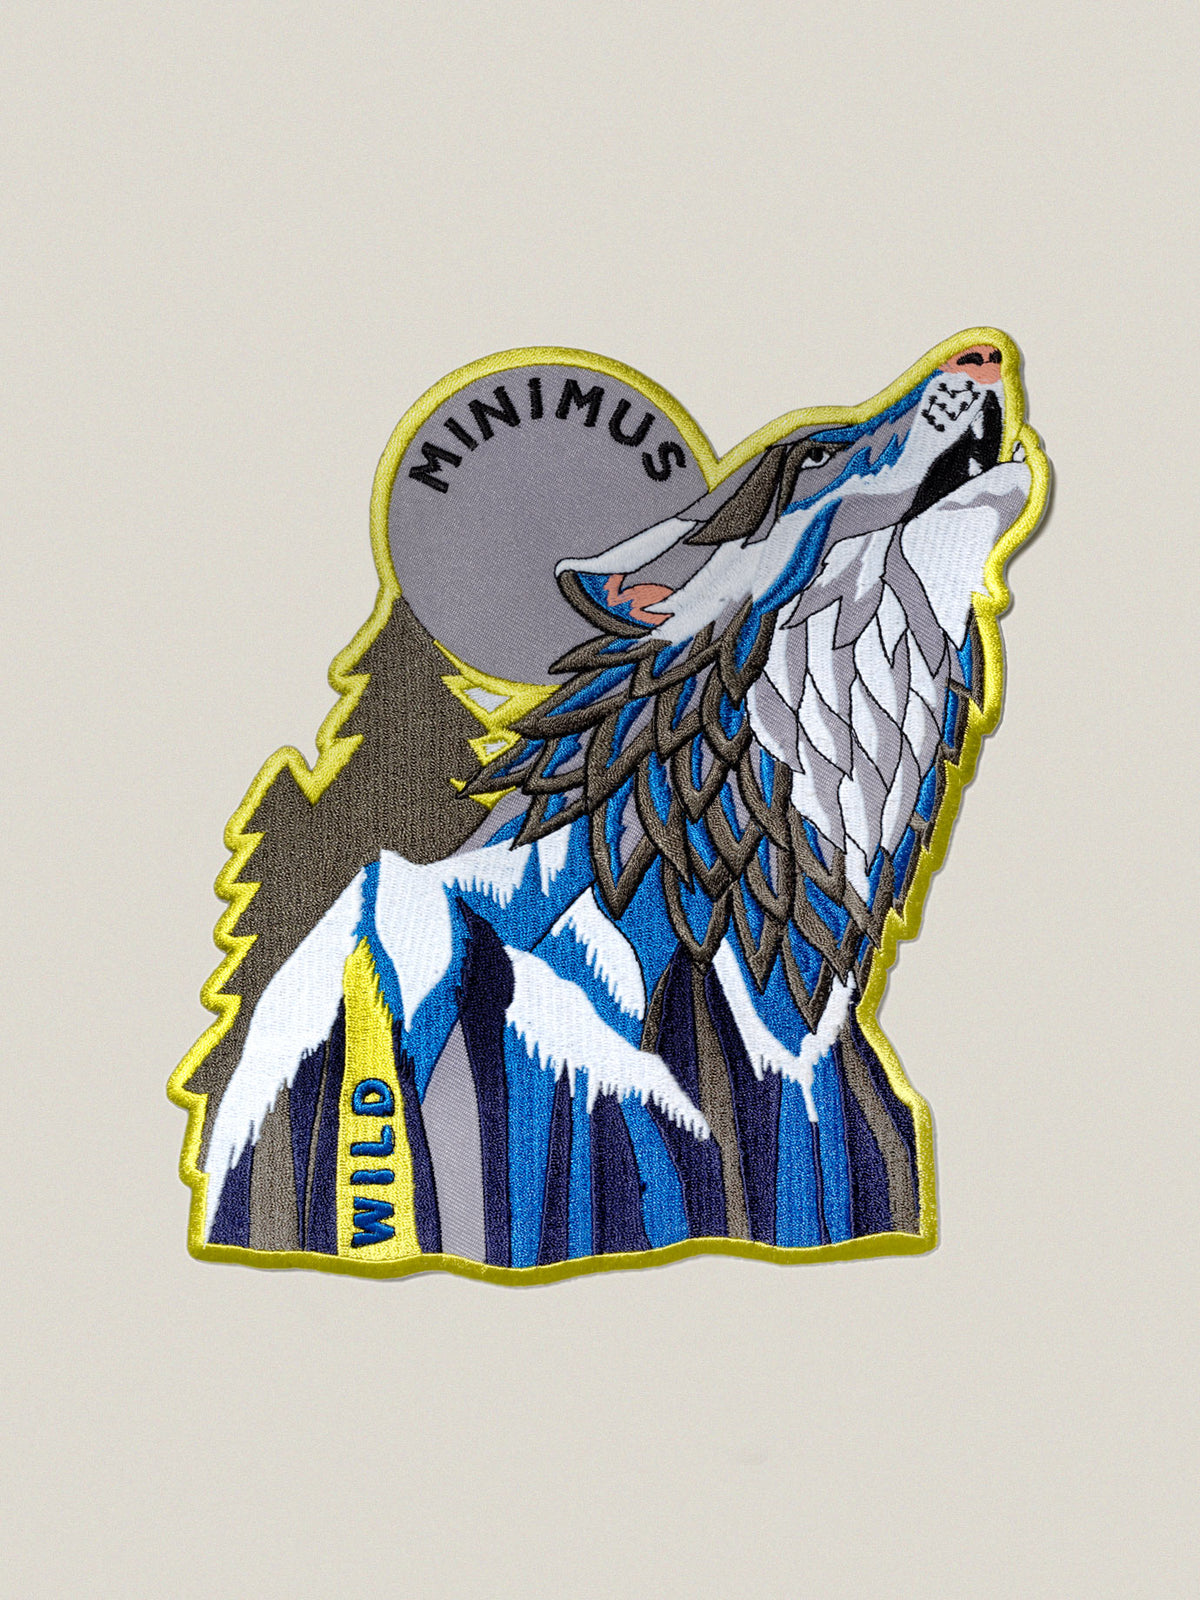 Wilderness Patch Iron On Patches On Clothes Animal Embroidered Patches For  Clothing Stripes Badges Wolf Whale Patch For Clothes